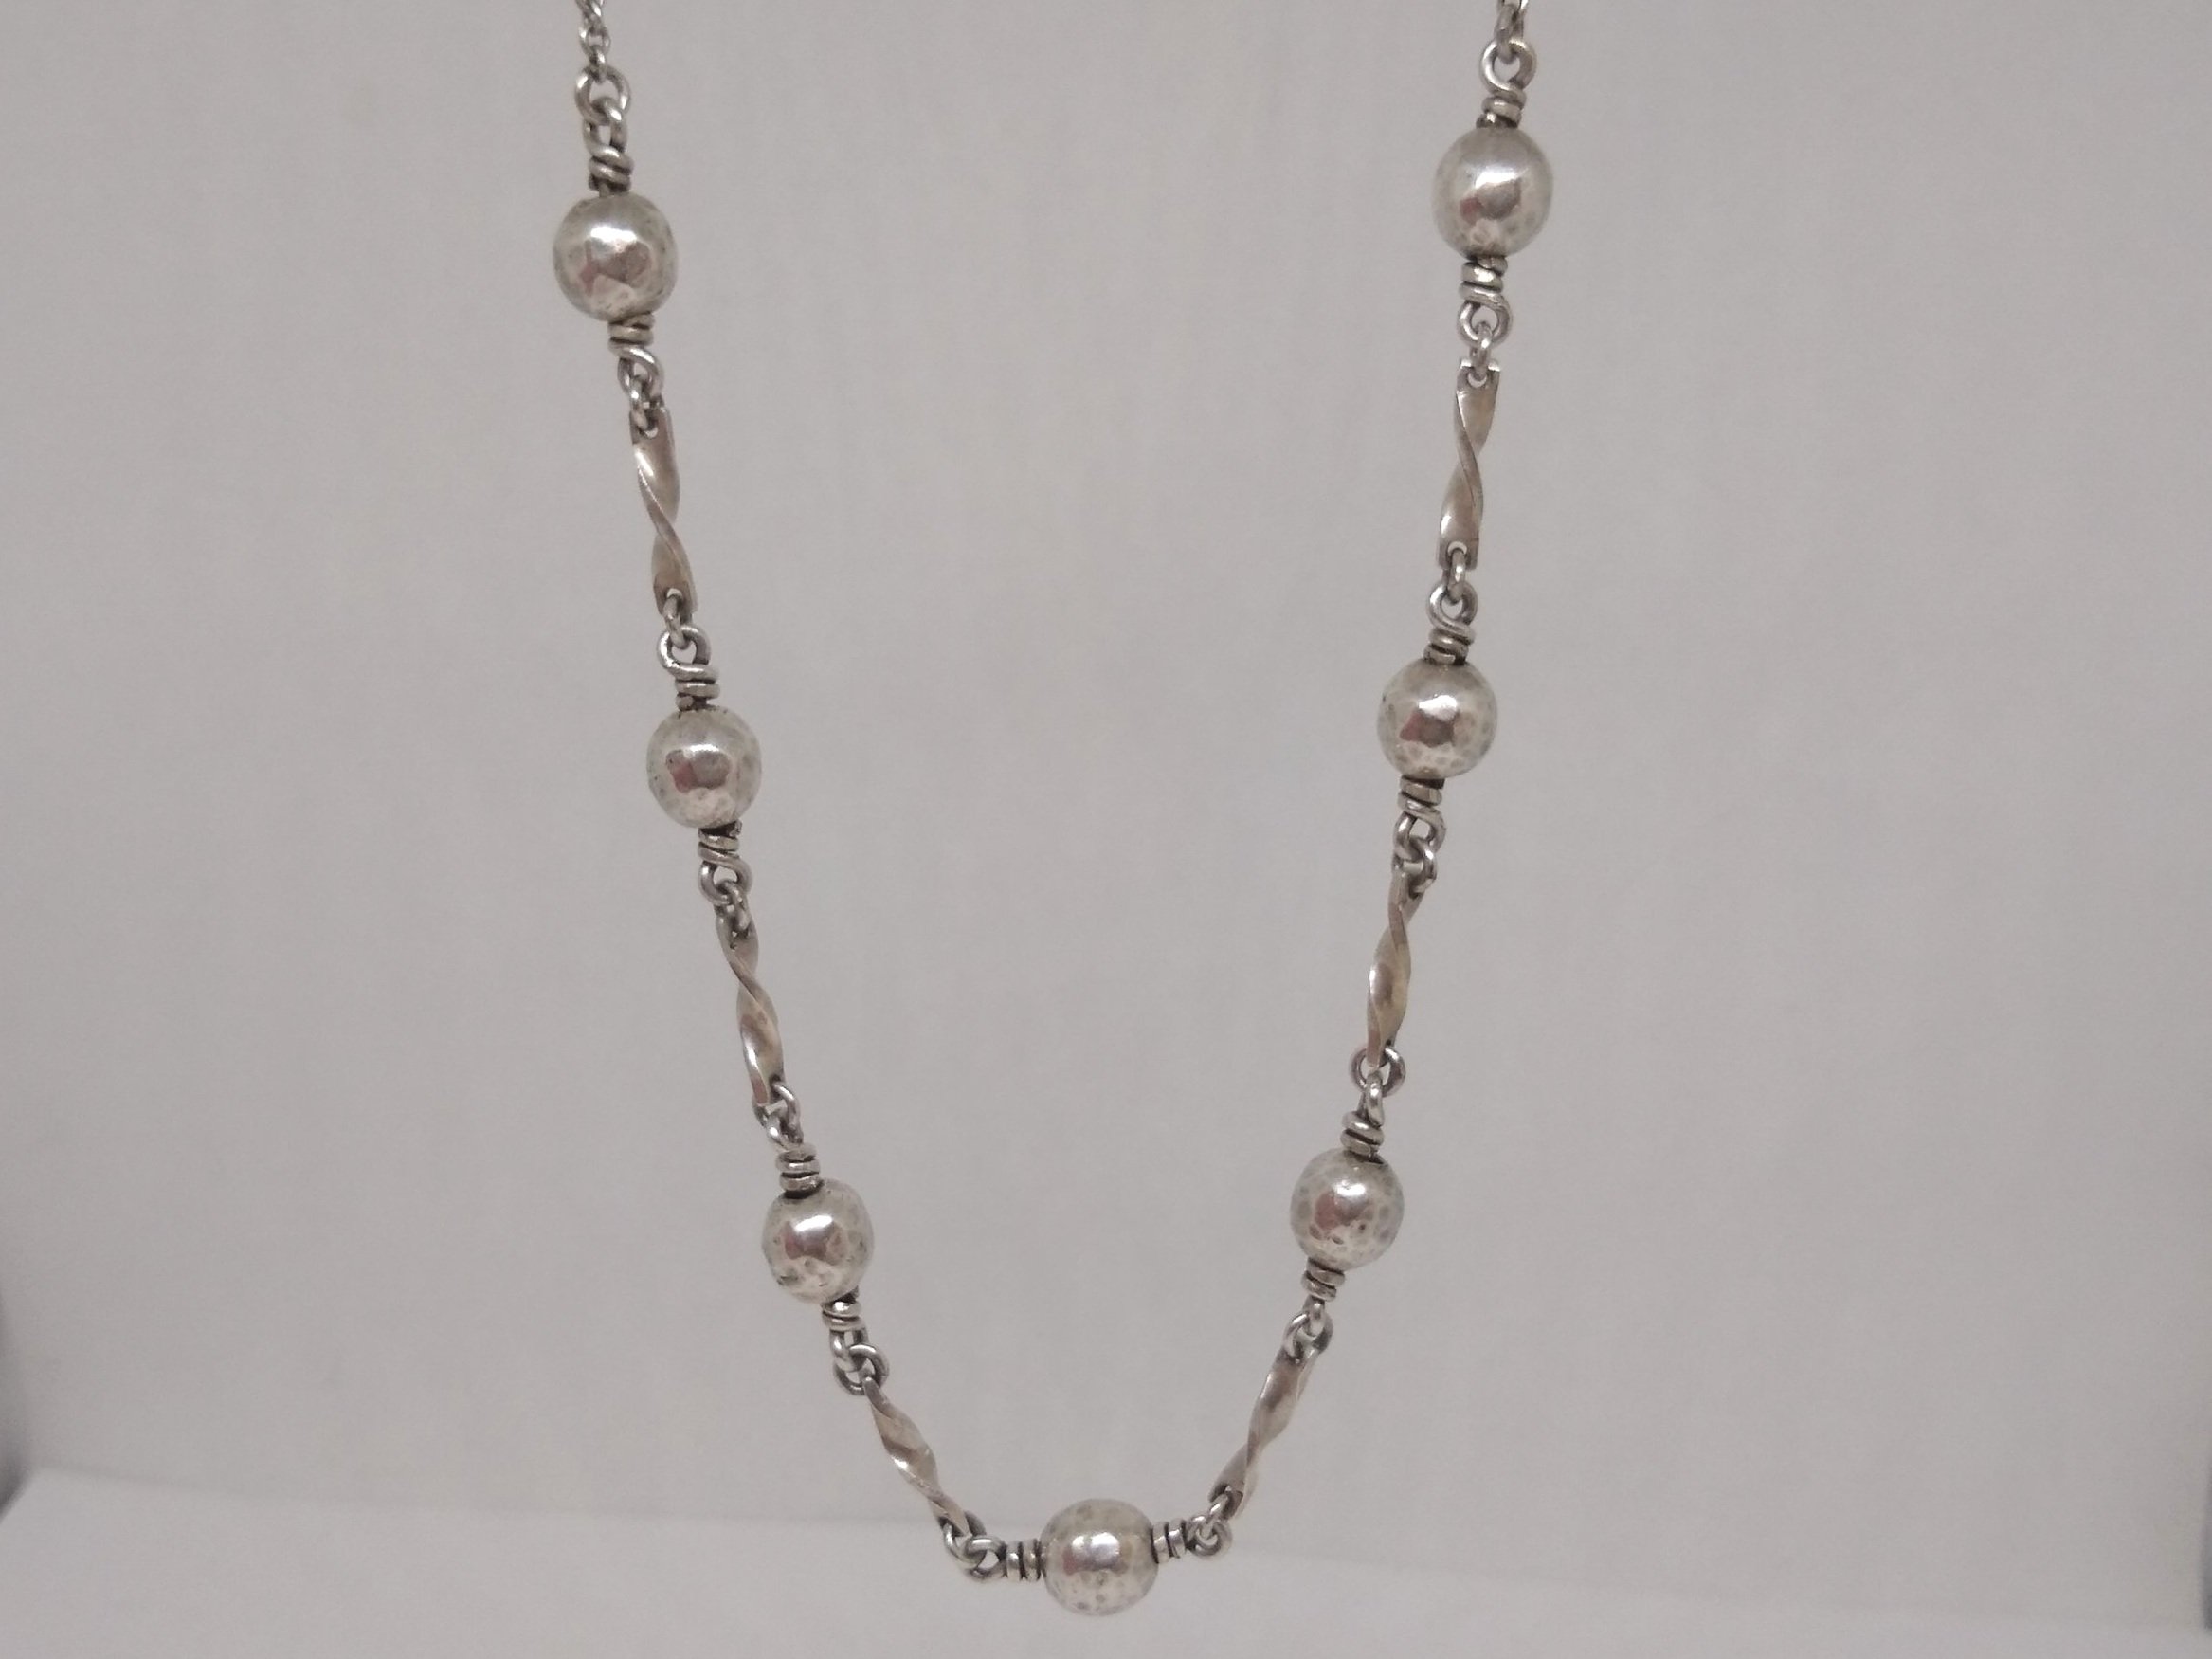 James Avery Forged Beaded Chain Necklace - 18 in.